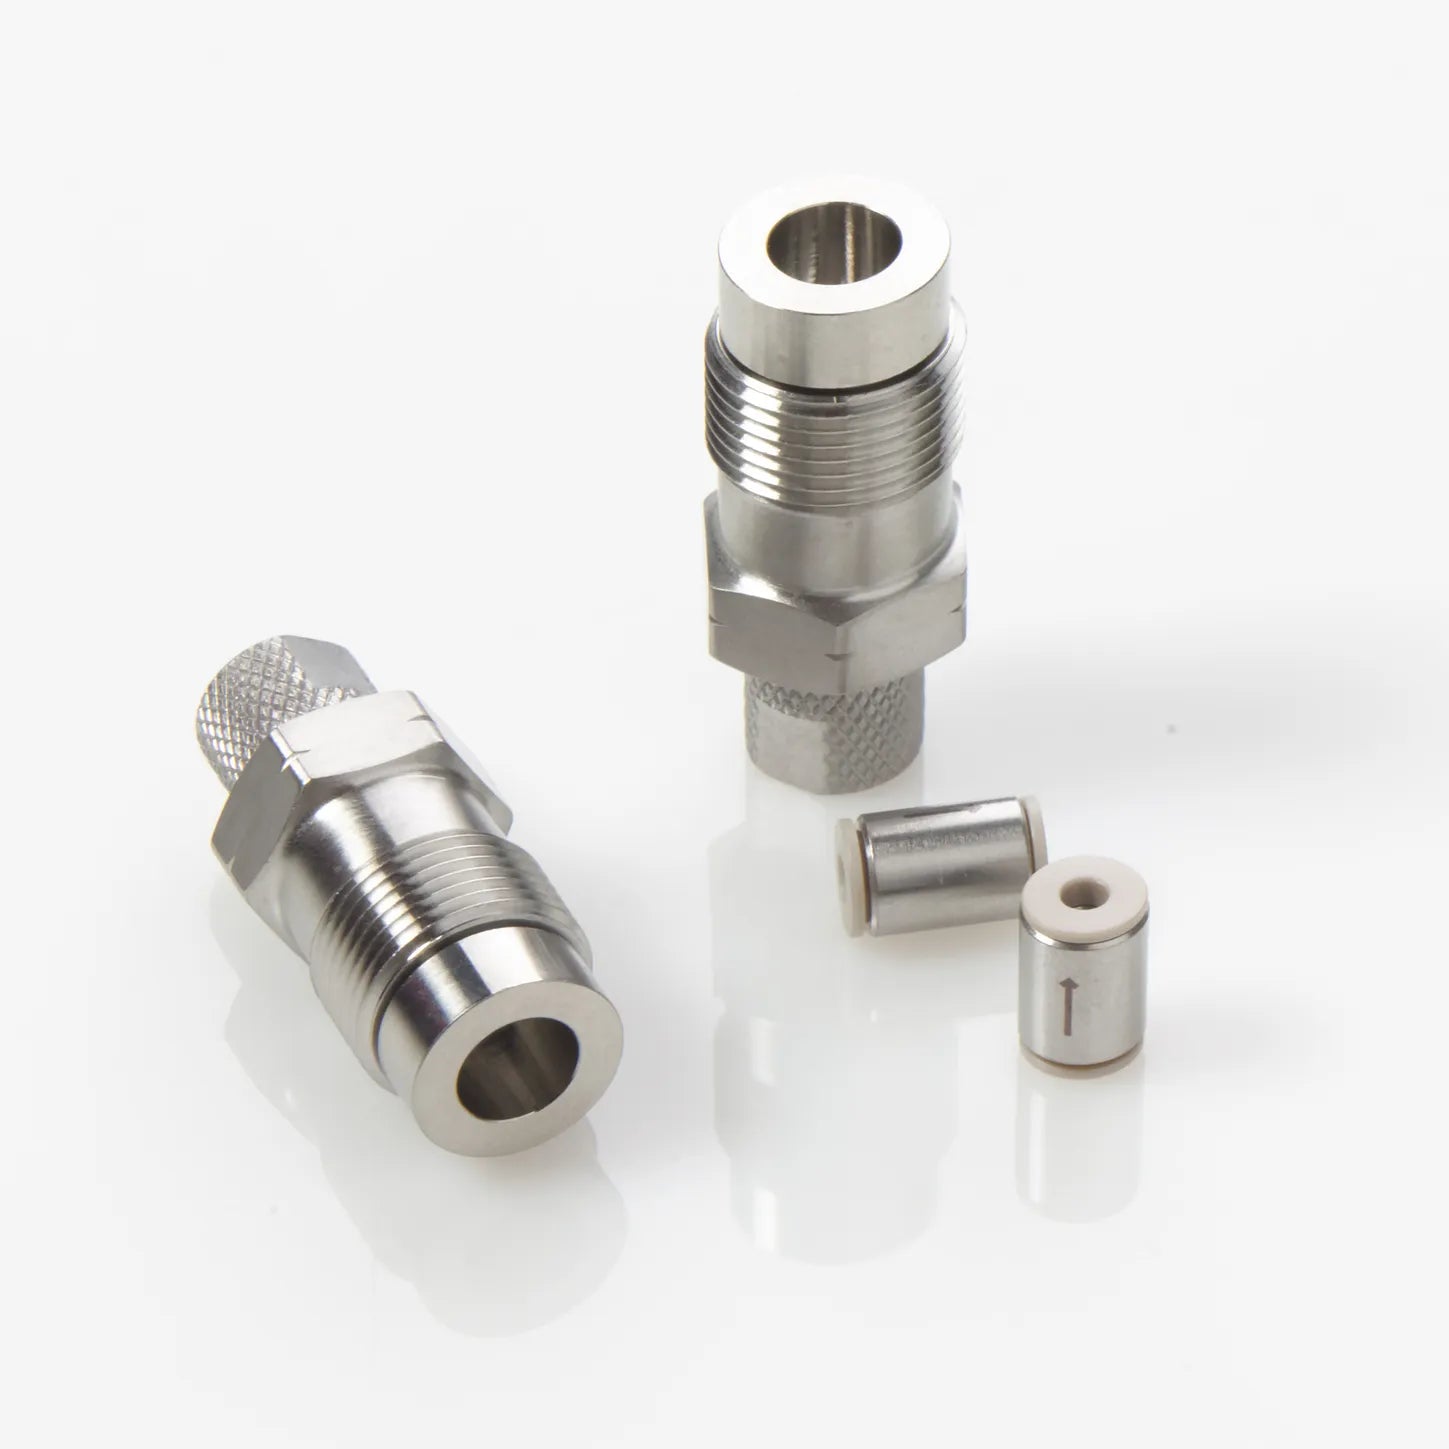 Cartridge Check Valve System Kit, Comparable to Waters # 700000253